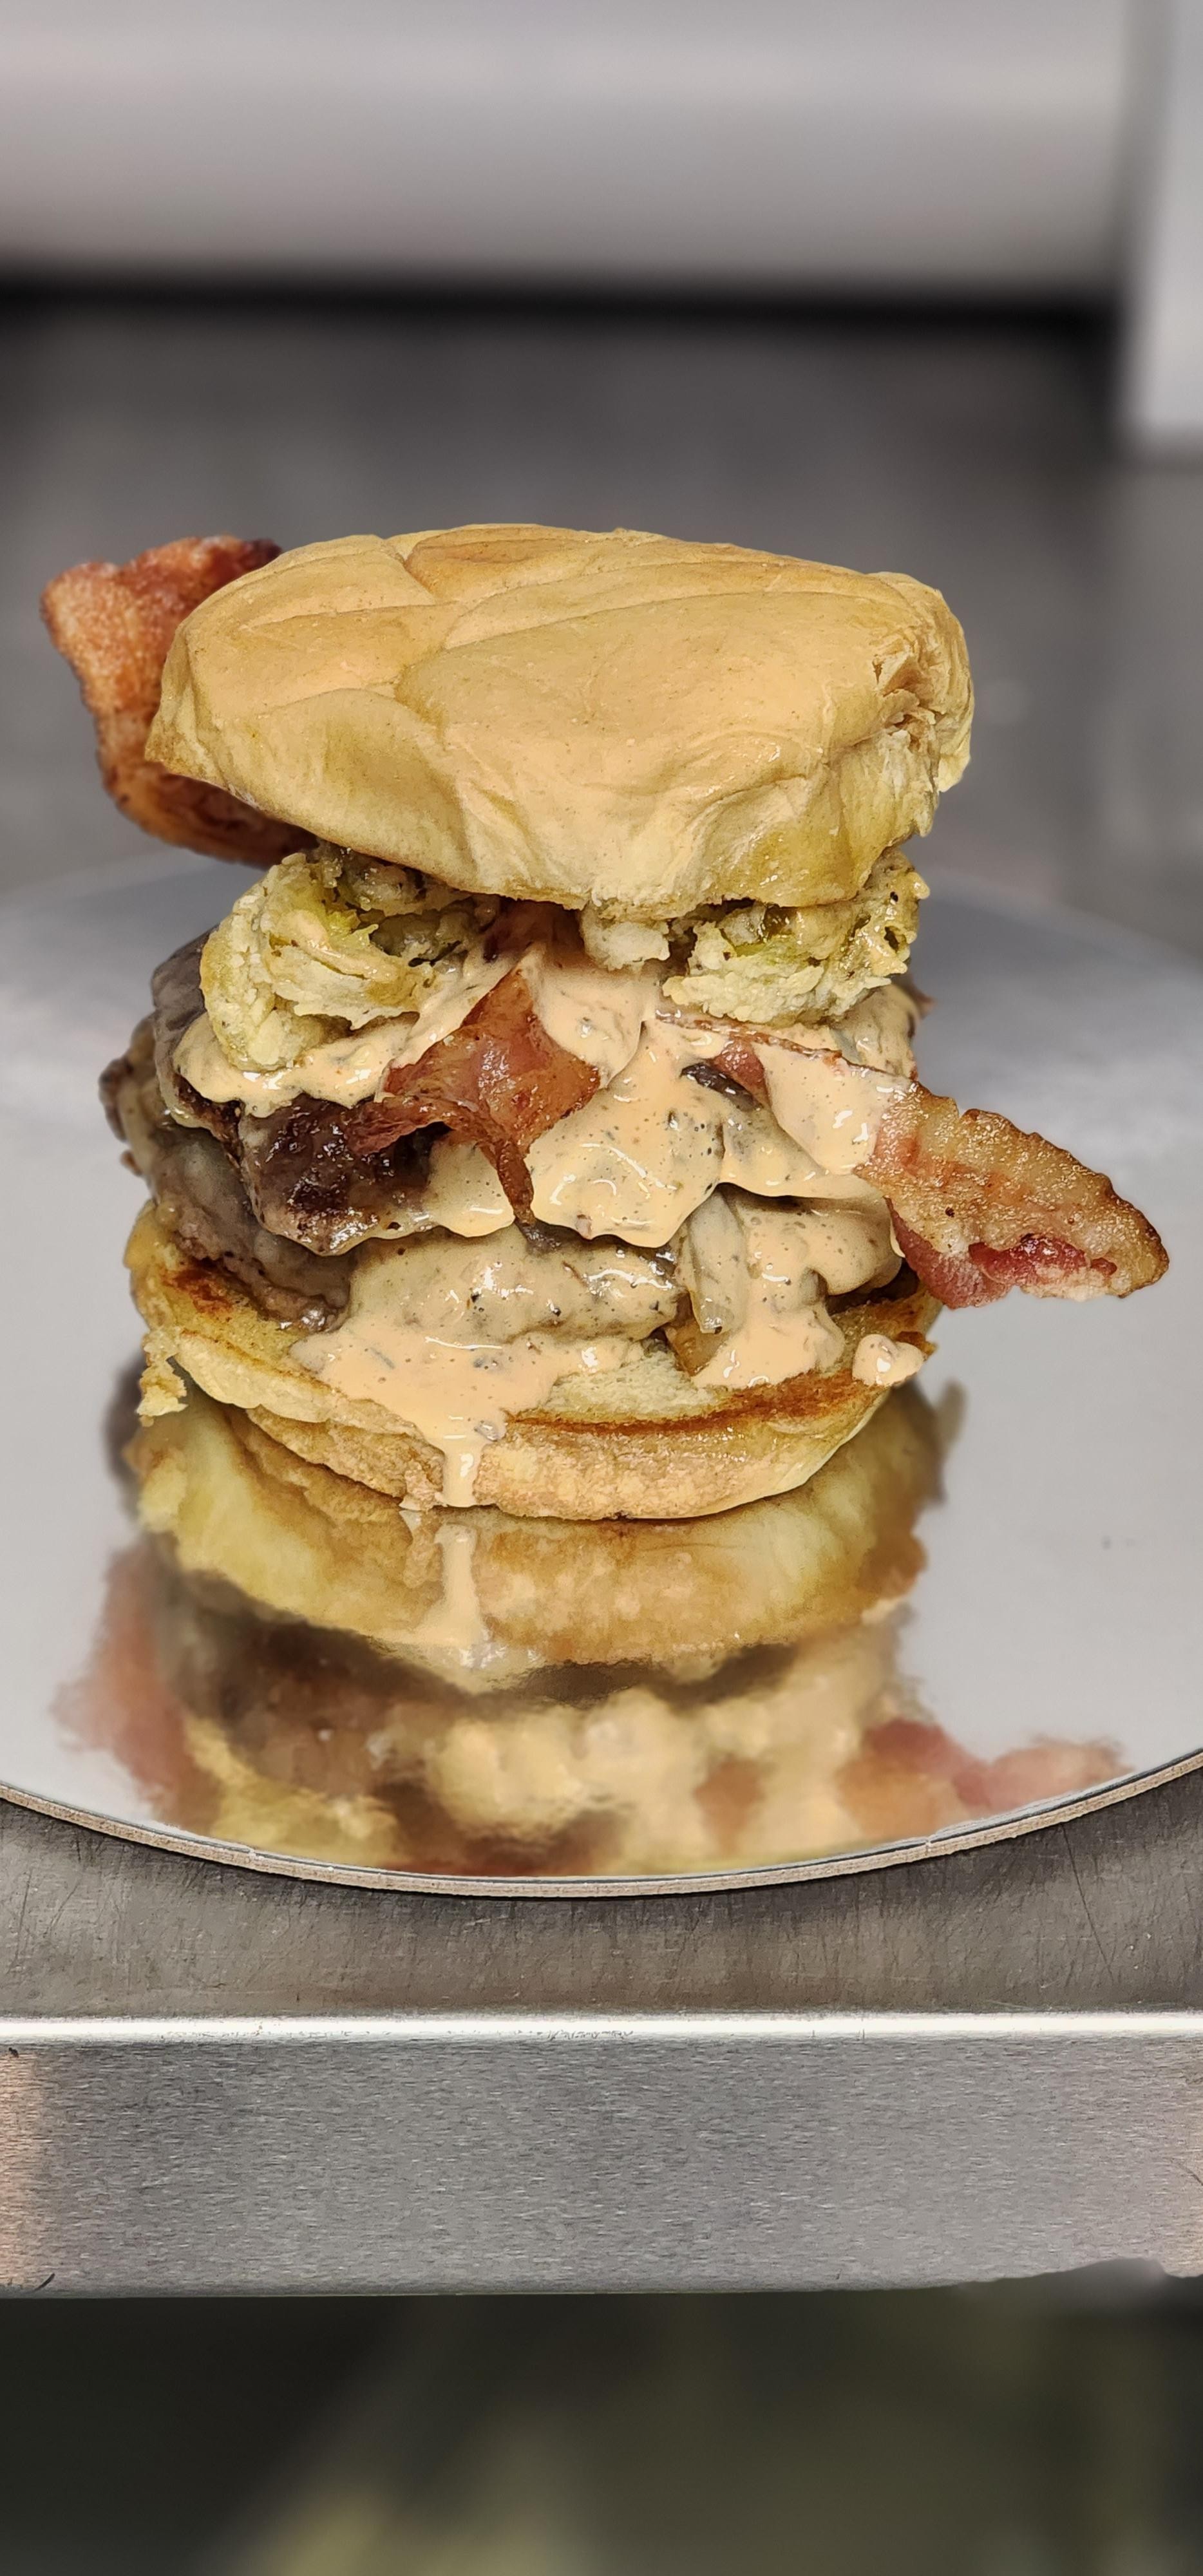 The Flipped Burger